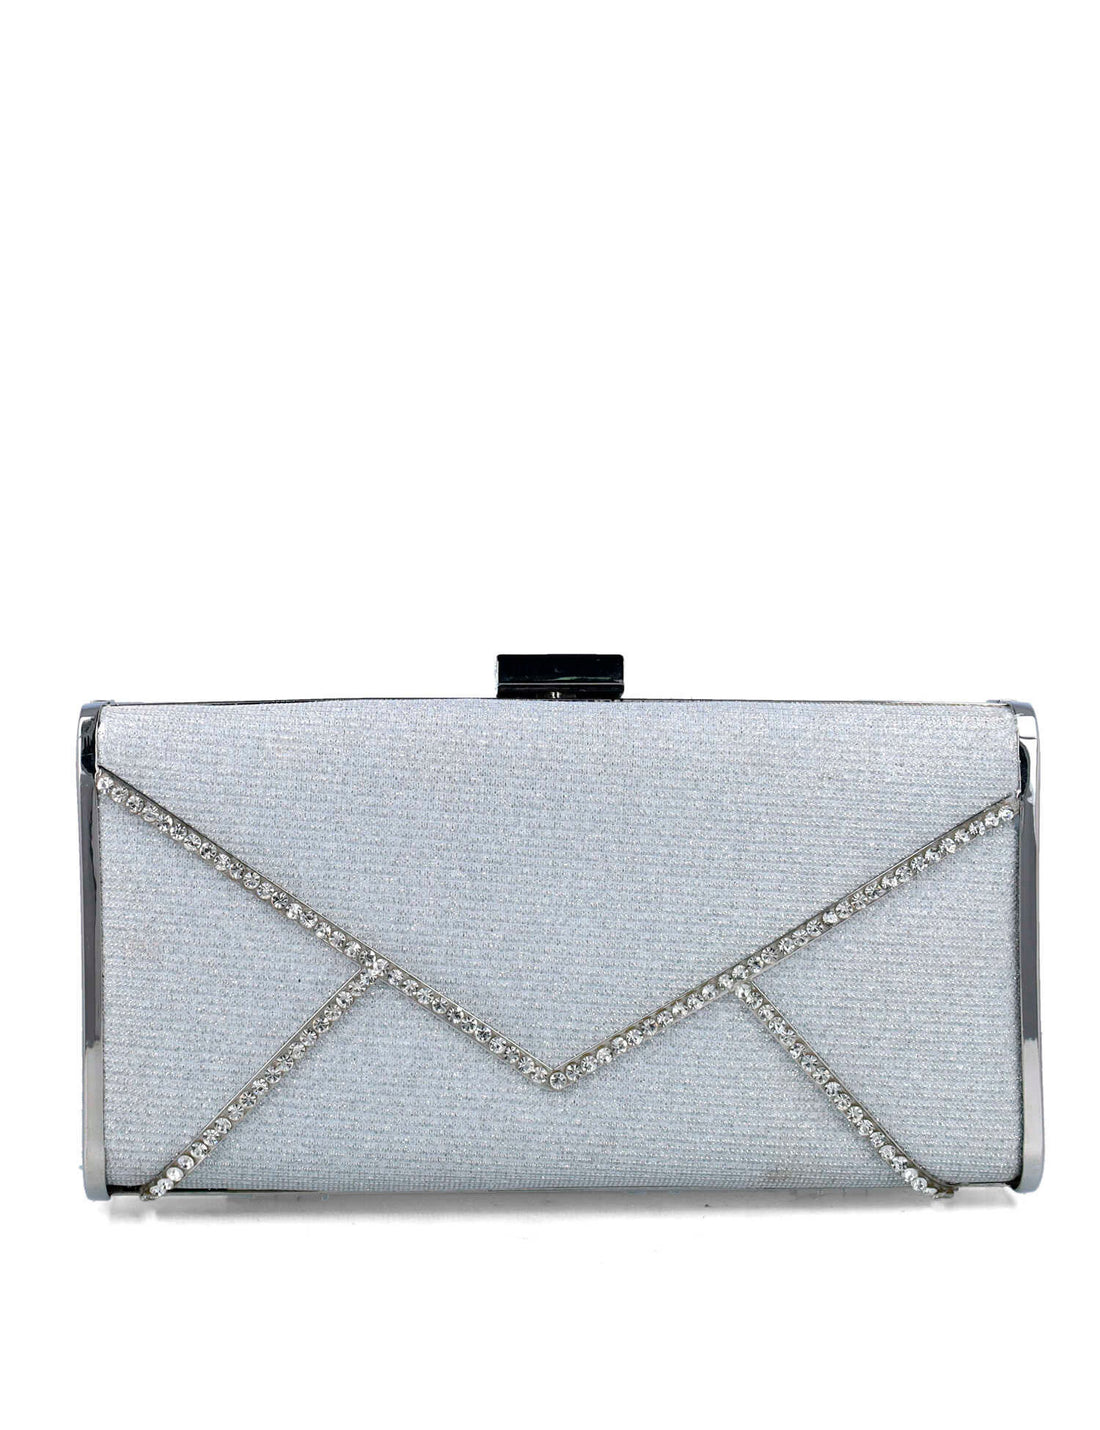 Silver Clutch With Silver Hardware_85656_09_01